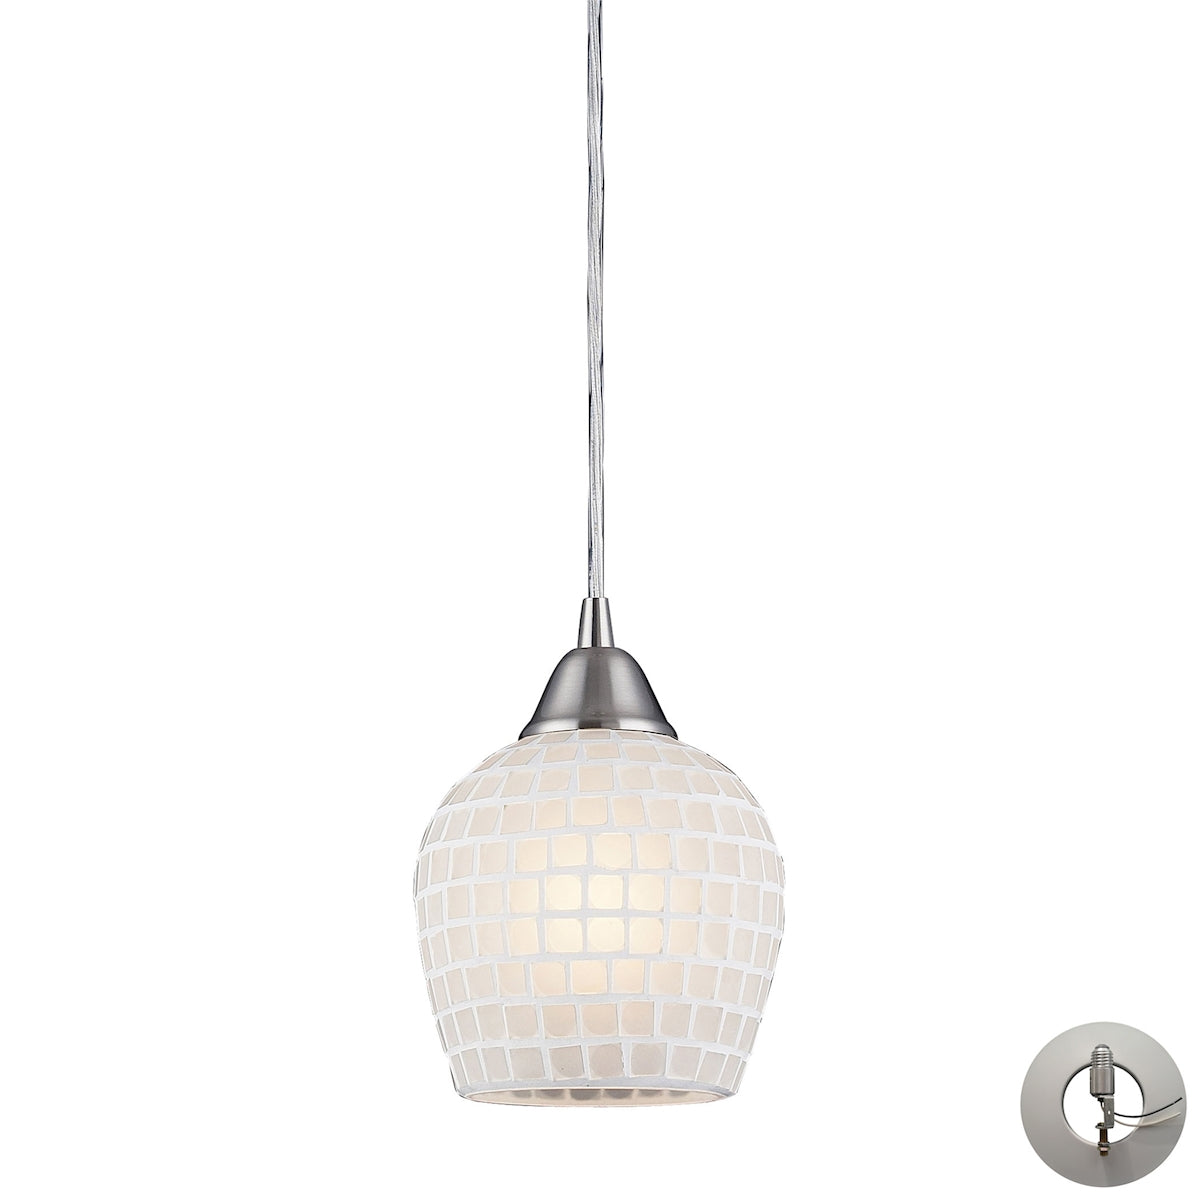 ELK Lighting 528-1WHT-LA Fusion 1-Light Mini Pendant in Satin Nickel with White Mosaic Glass - Includes Adapter Kit